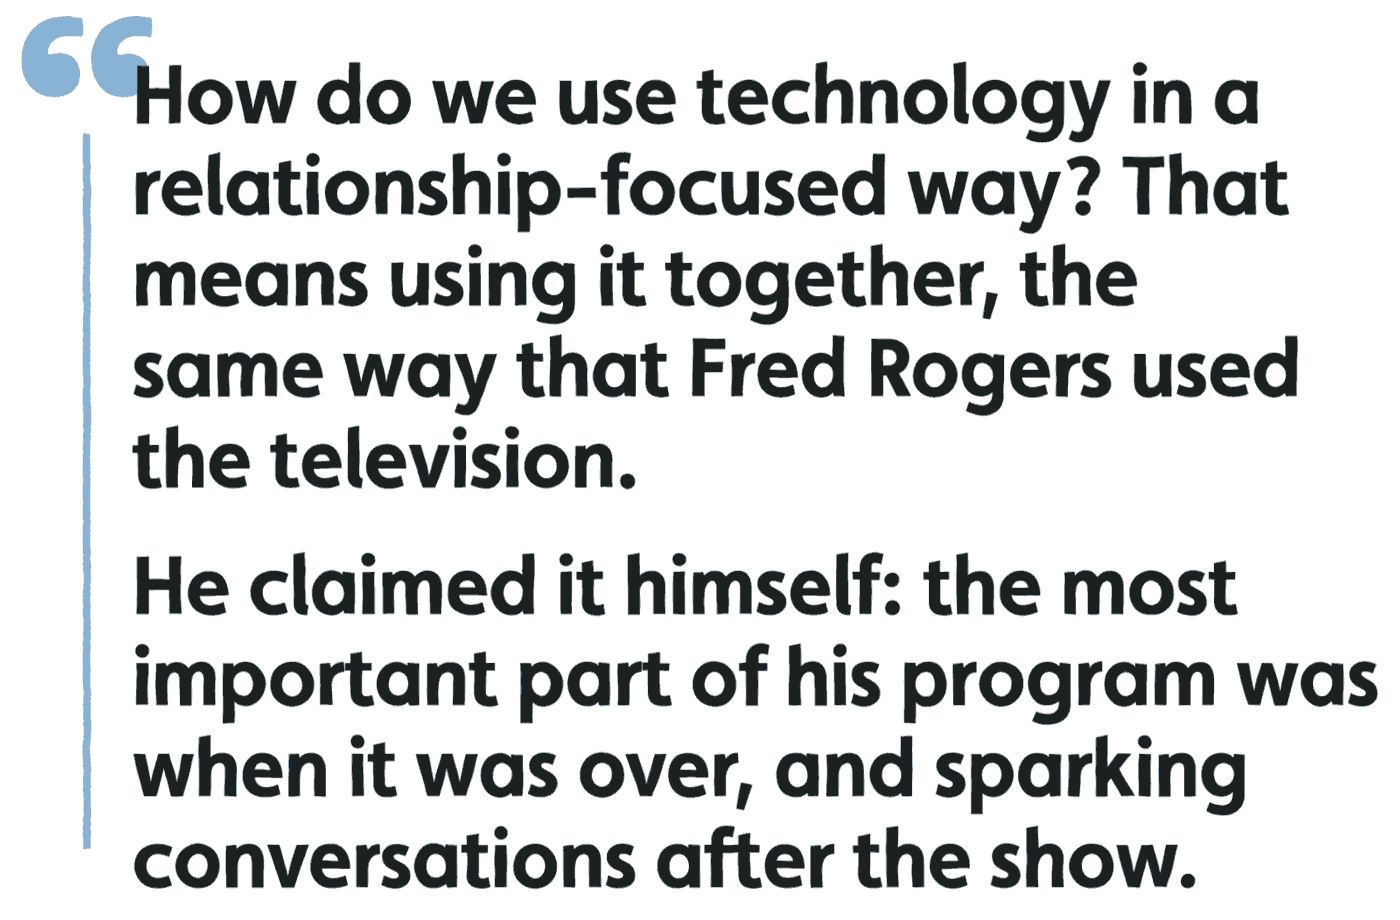 How do we use technology in a relationship-focused way? That means using it together, the same way that Fred Rogers used the television. He claimed it himself: the most important part of his program was when it was over, and sparking conversations after the show.